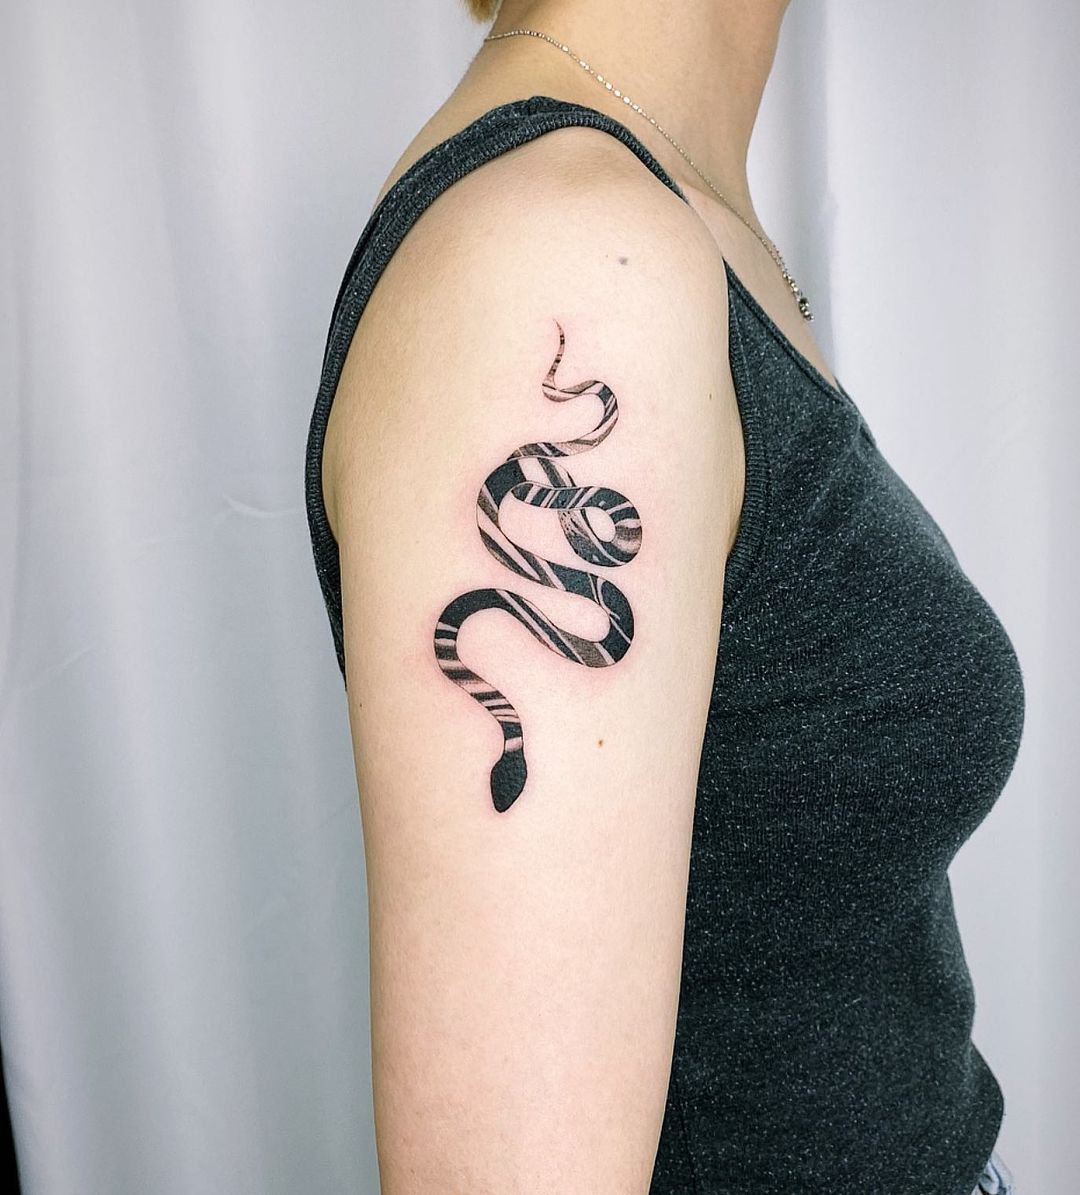 Get Inspired With These Snake Tattoo Ideas For Your Upper Arm